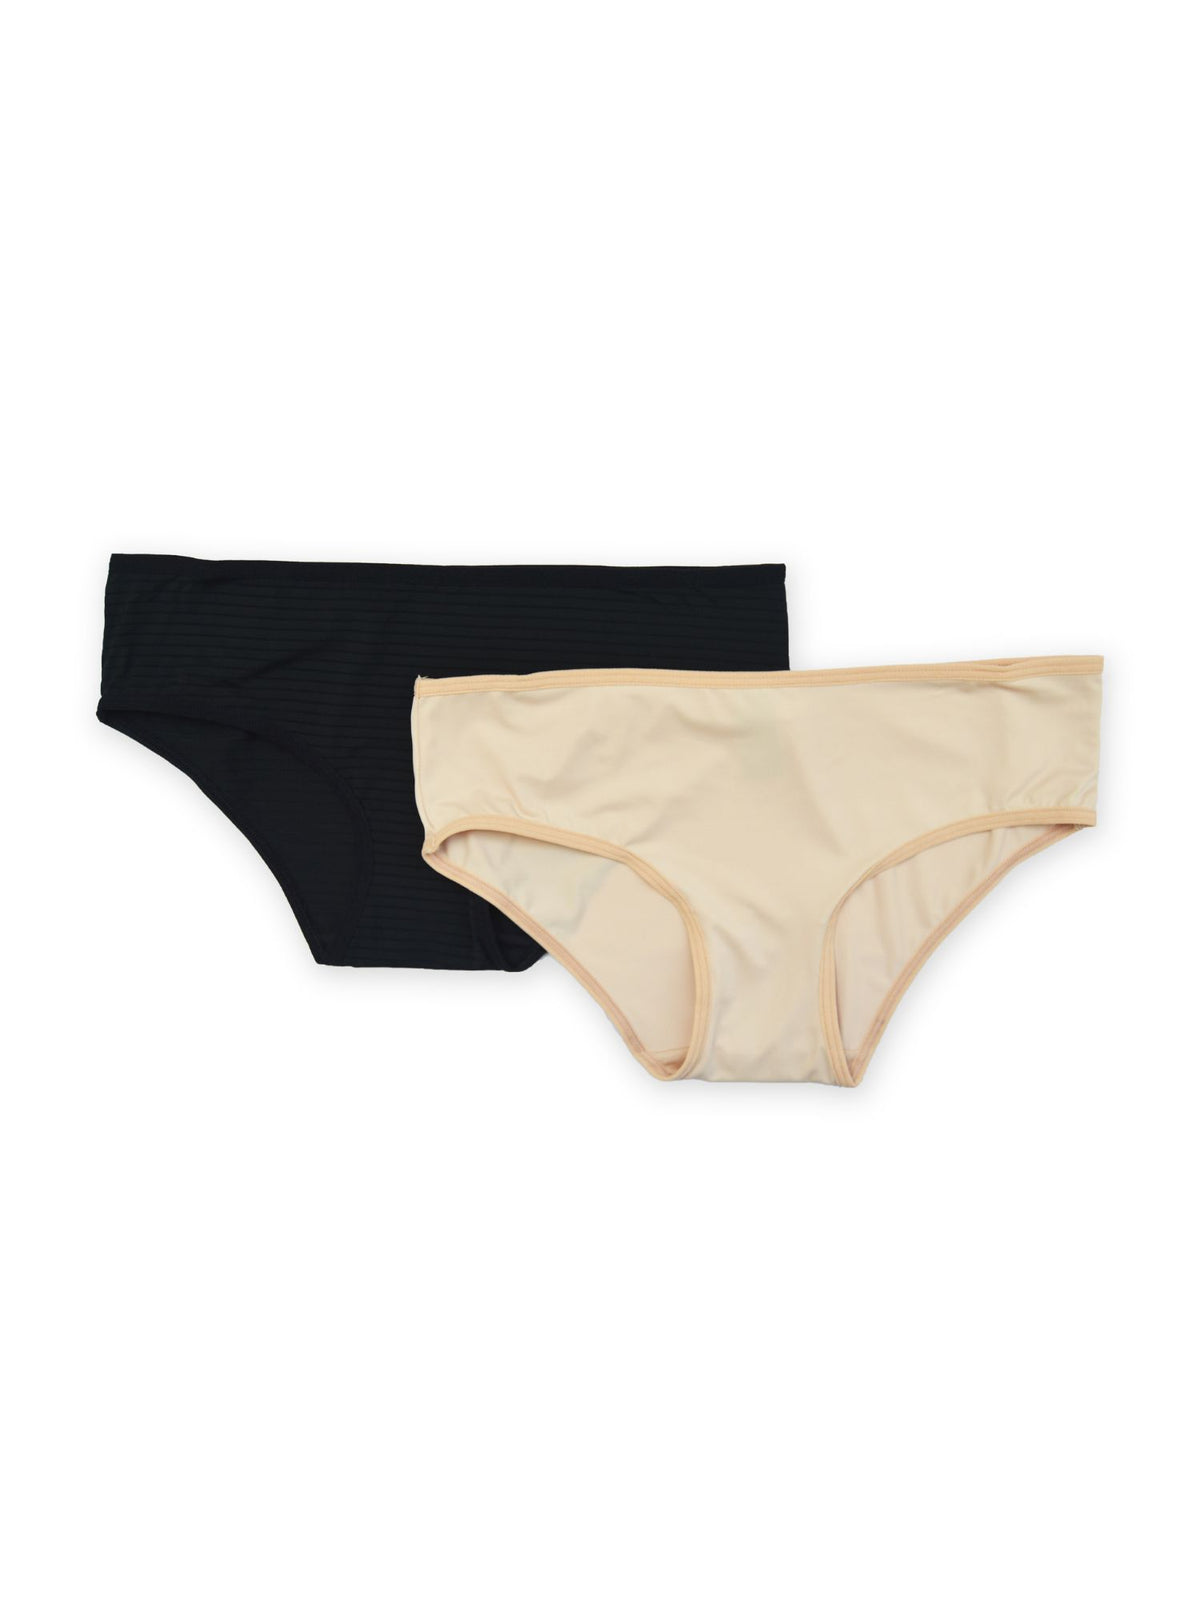 Penny - Hipster Body - 2 Pack in Black & Nude 2